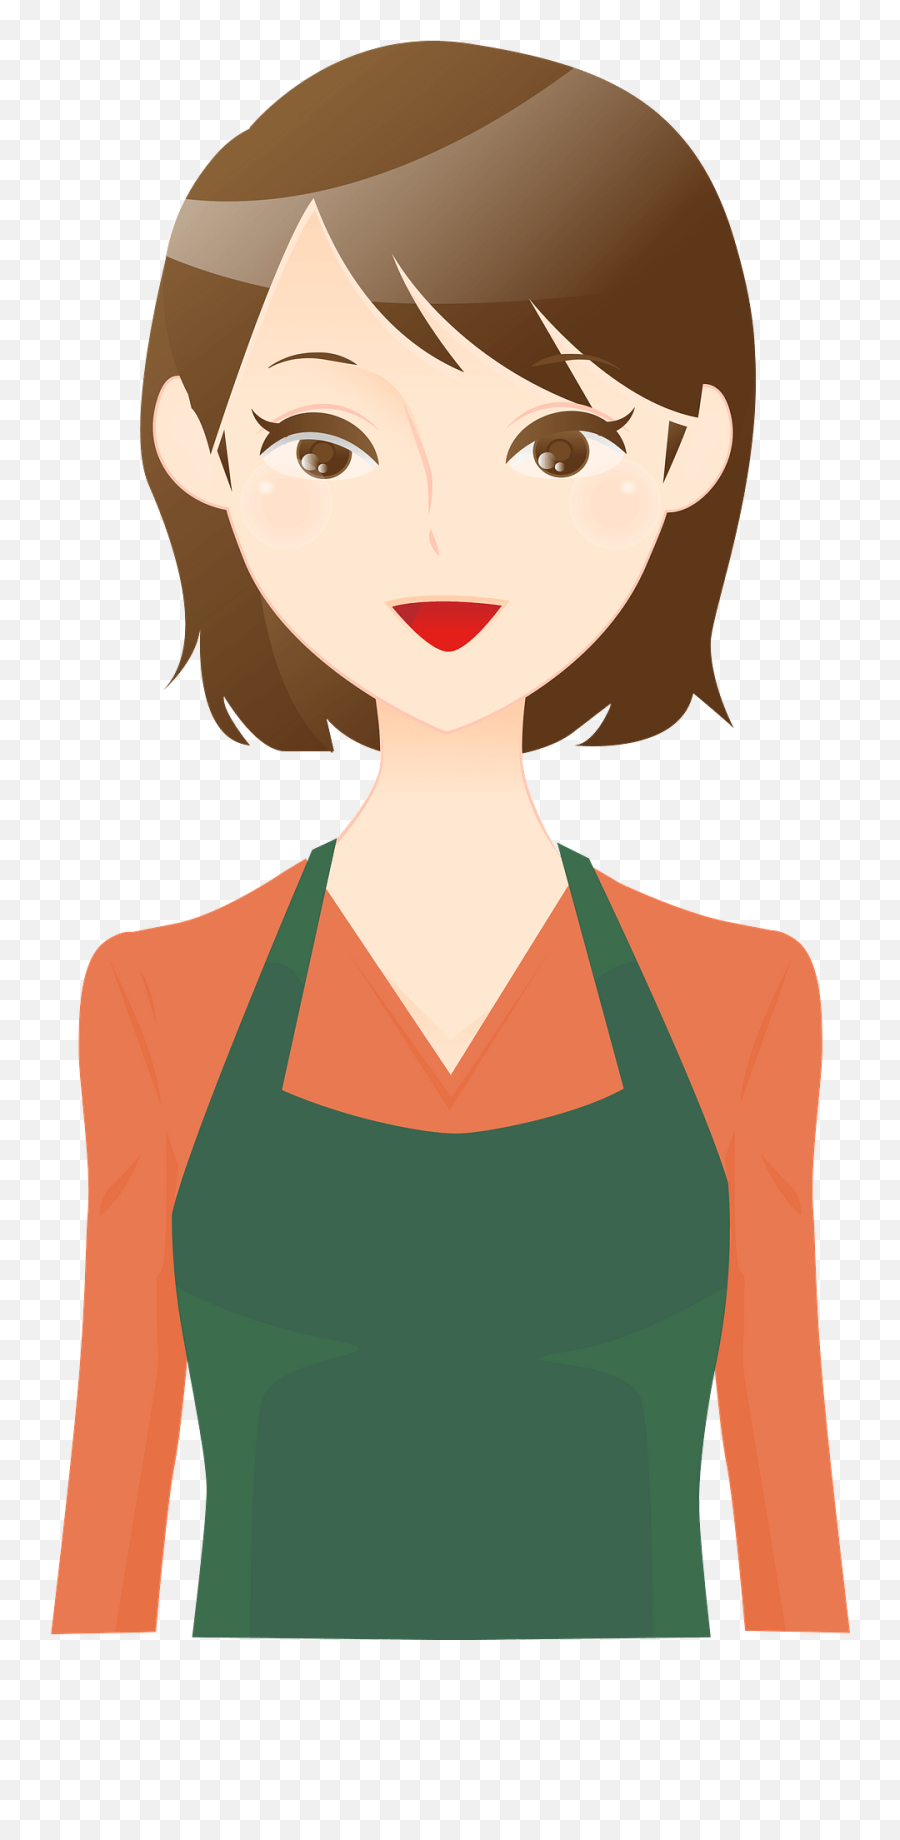 Woman Is Wearing An Apron Clipart - Woman Wearing Apron Clipart Free Emoji,Apron Clipart